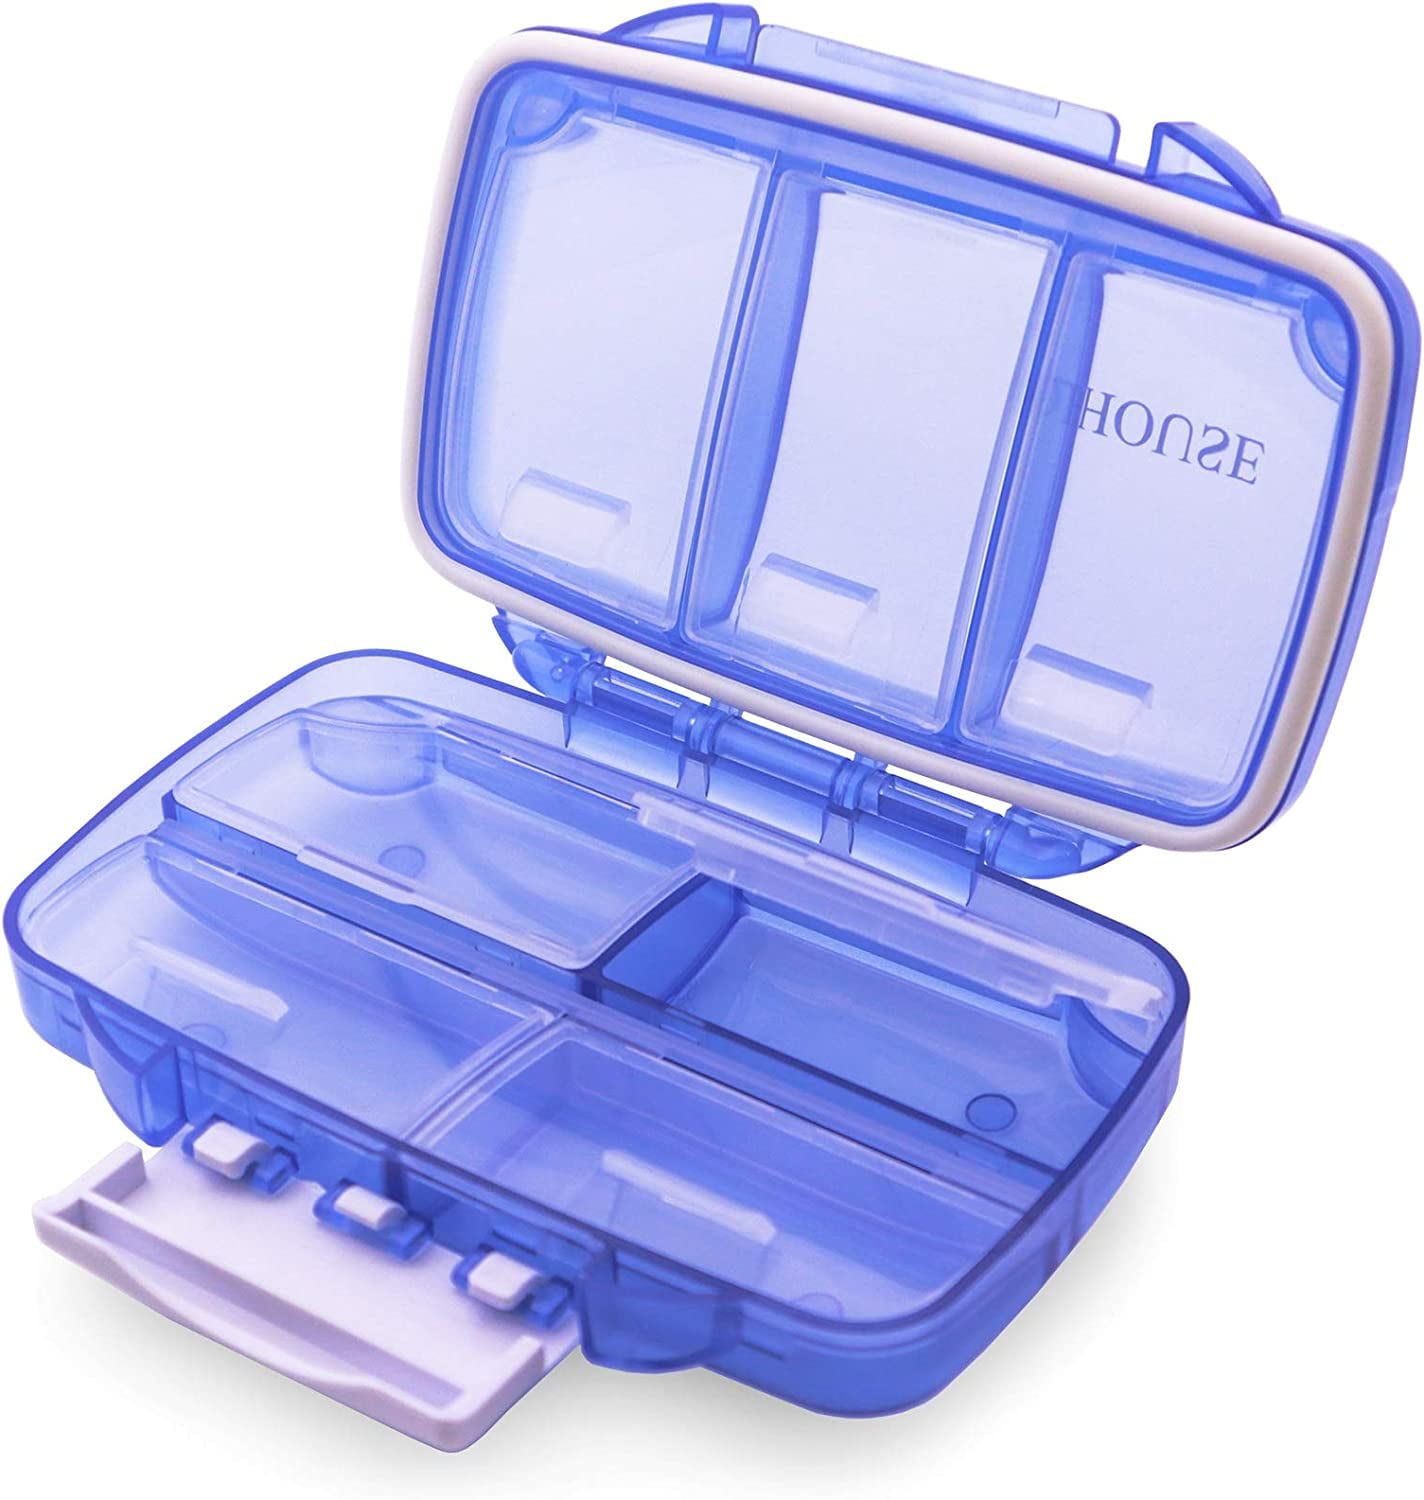 Cute Pill Organizer 7 Day, Weekly Pill Cases Box Waterproof Moisture Proof,  Travel Pill Box Case Portable Design to Hold Victim - China Cute Pill  Organizer, Weekly Pill Cases Box